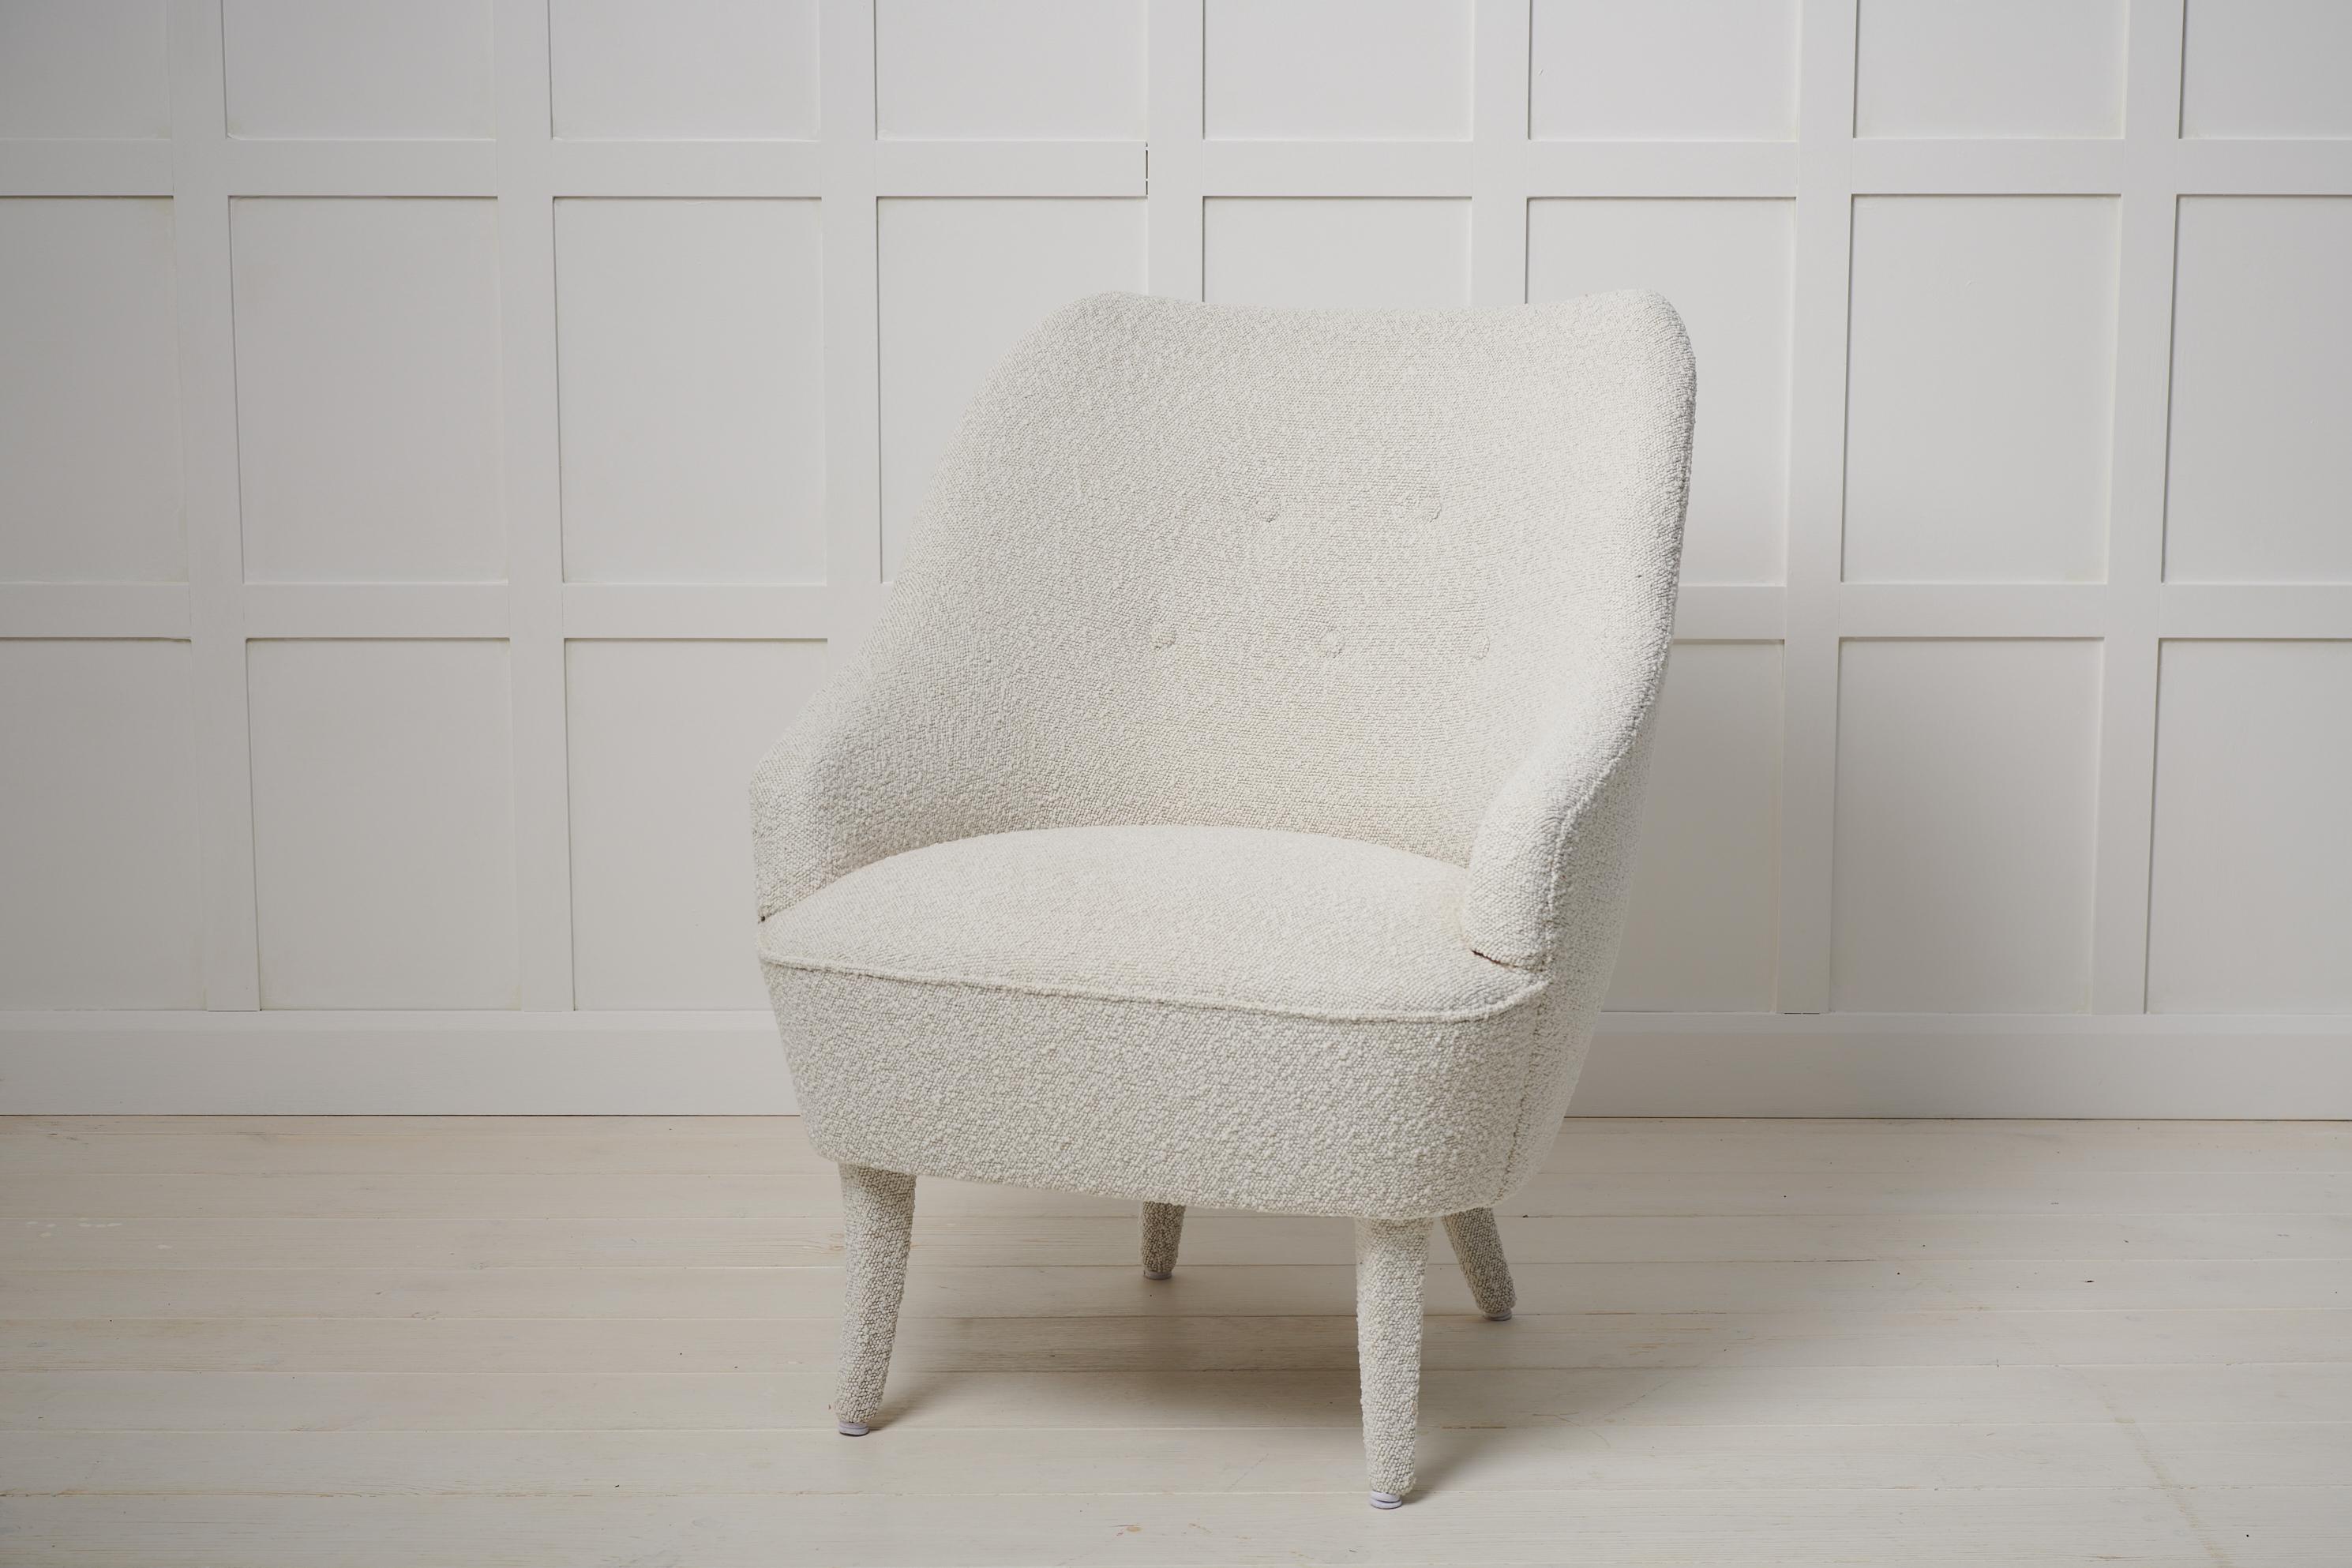 Swedish modern vintage armchair from the 1930s to 1940s that’s been newly renovated. The armchair has renovated padding with new upholstery in boucle fabric. The legs have been upholstered with the same fabric for a seamless look. Swedish modern